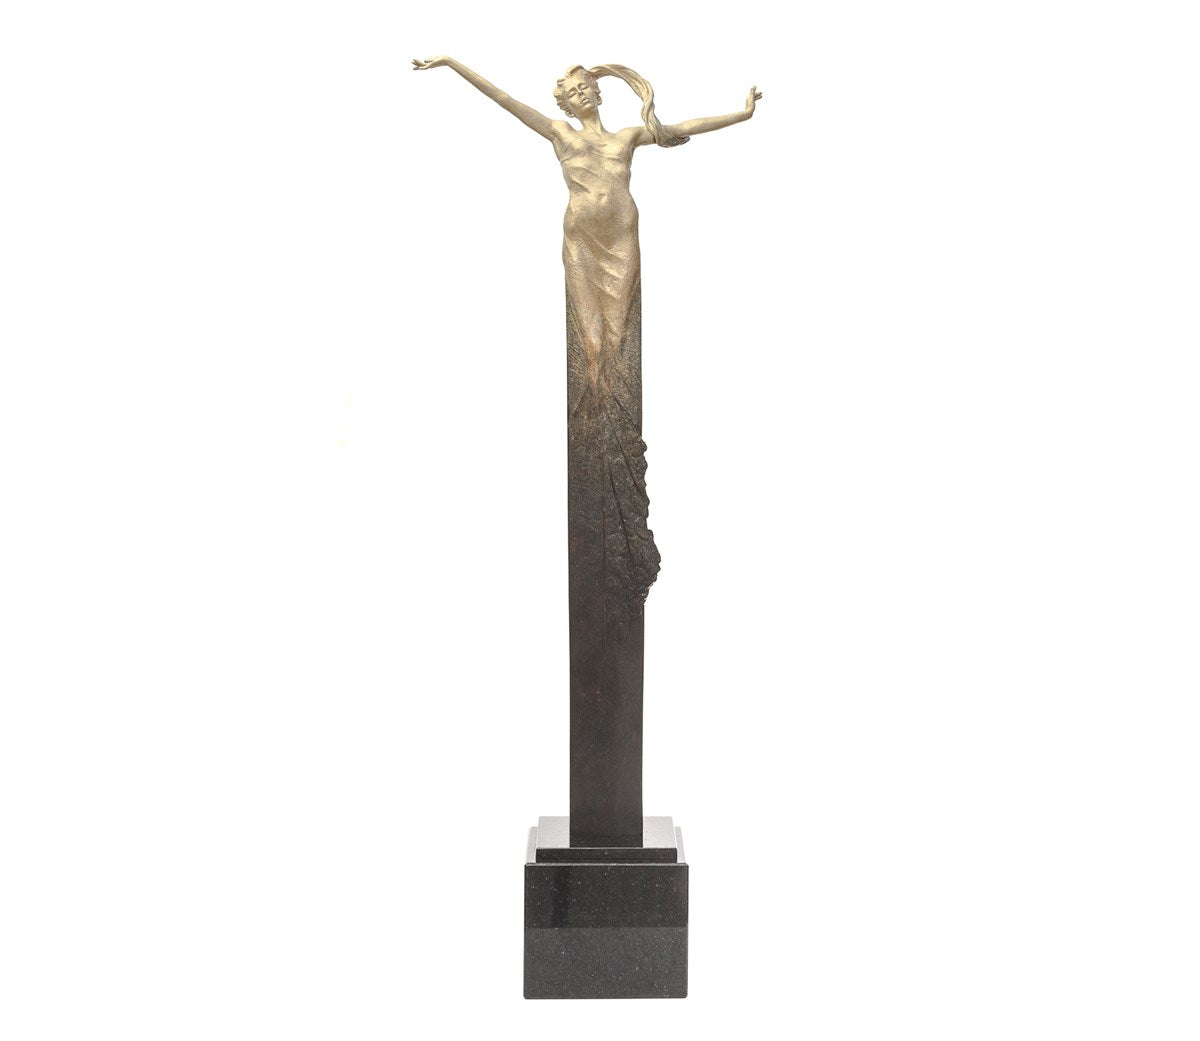 The sculpture Freedom by Carl Payne - a stunning figurative work.